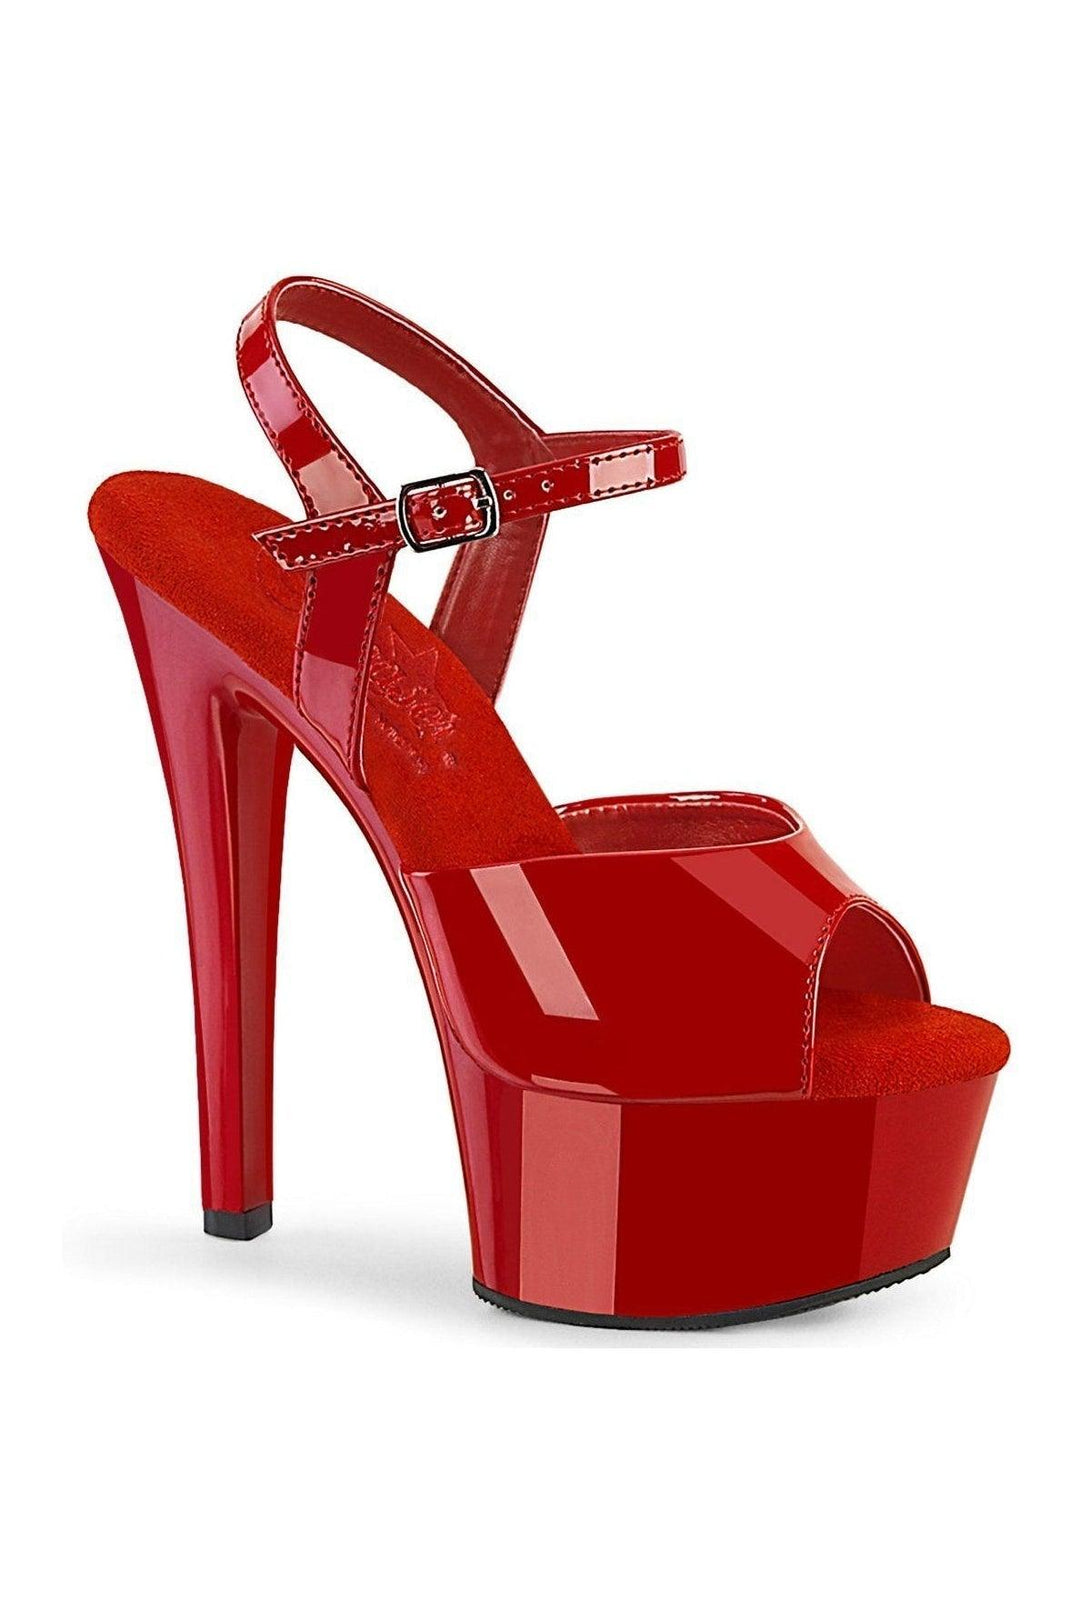 GLEAM-609 Sandal | Red Patent-Sandals-Pleaser-Red-7-Patent-SEXYSHOES.COM